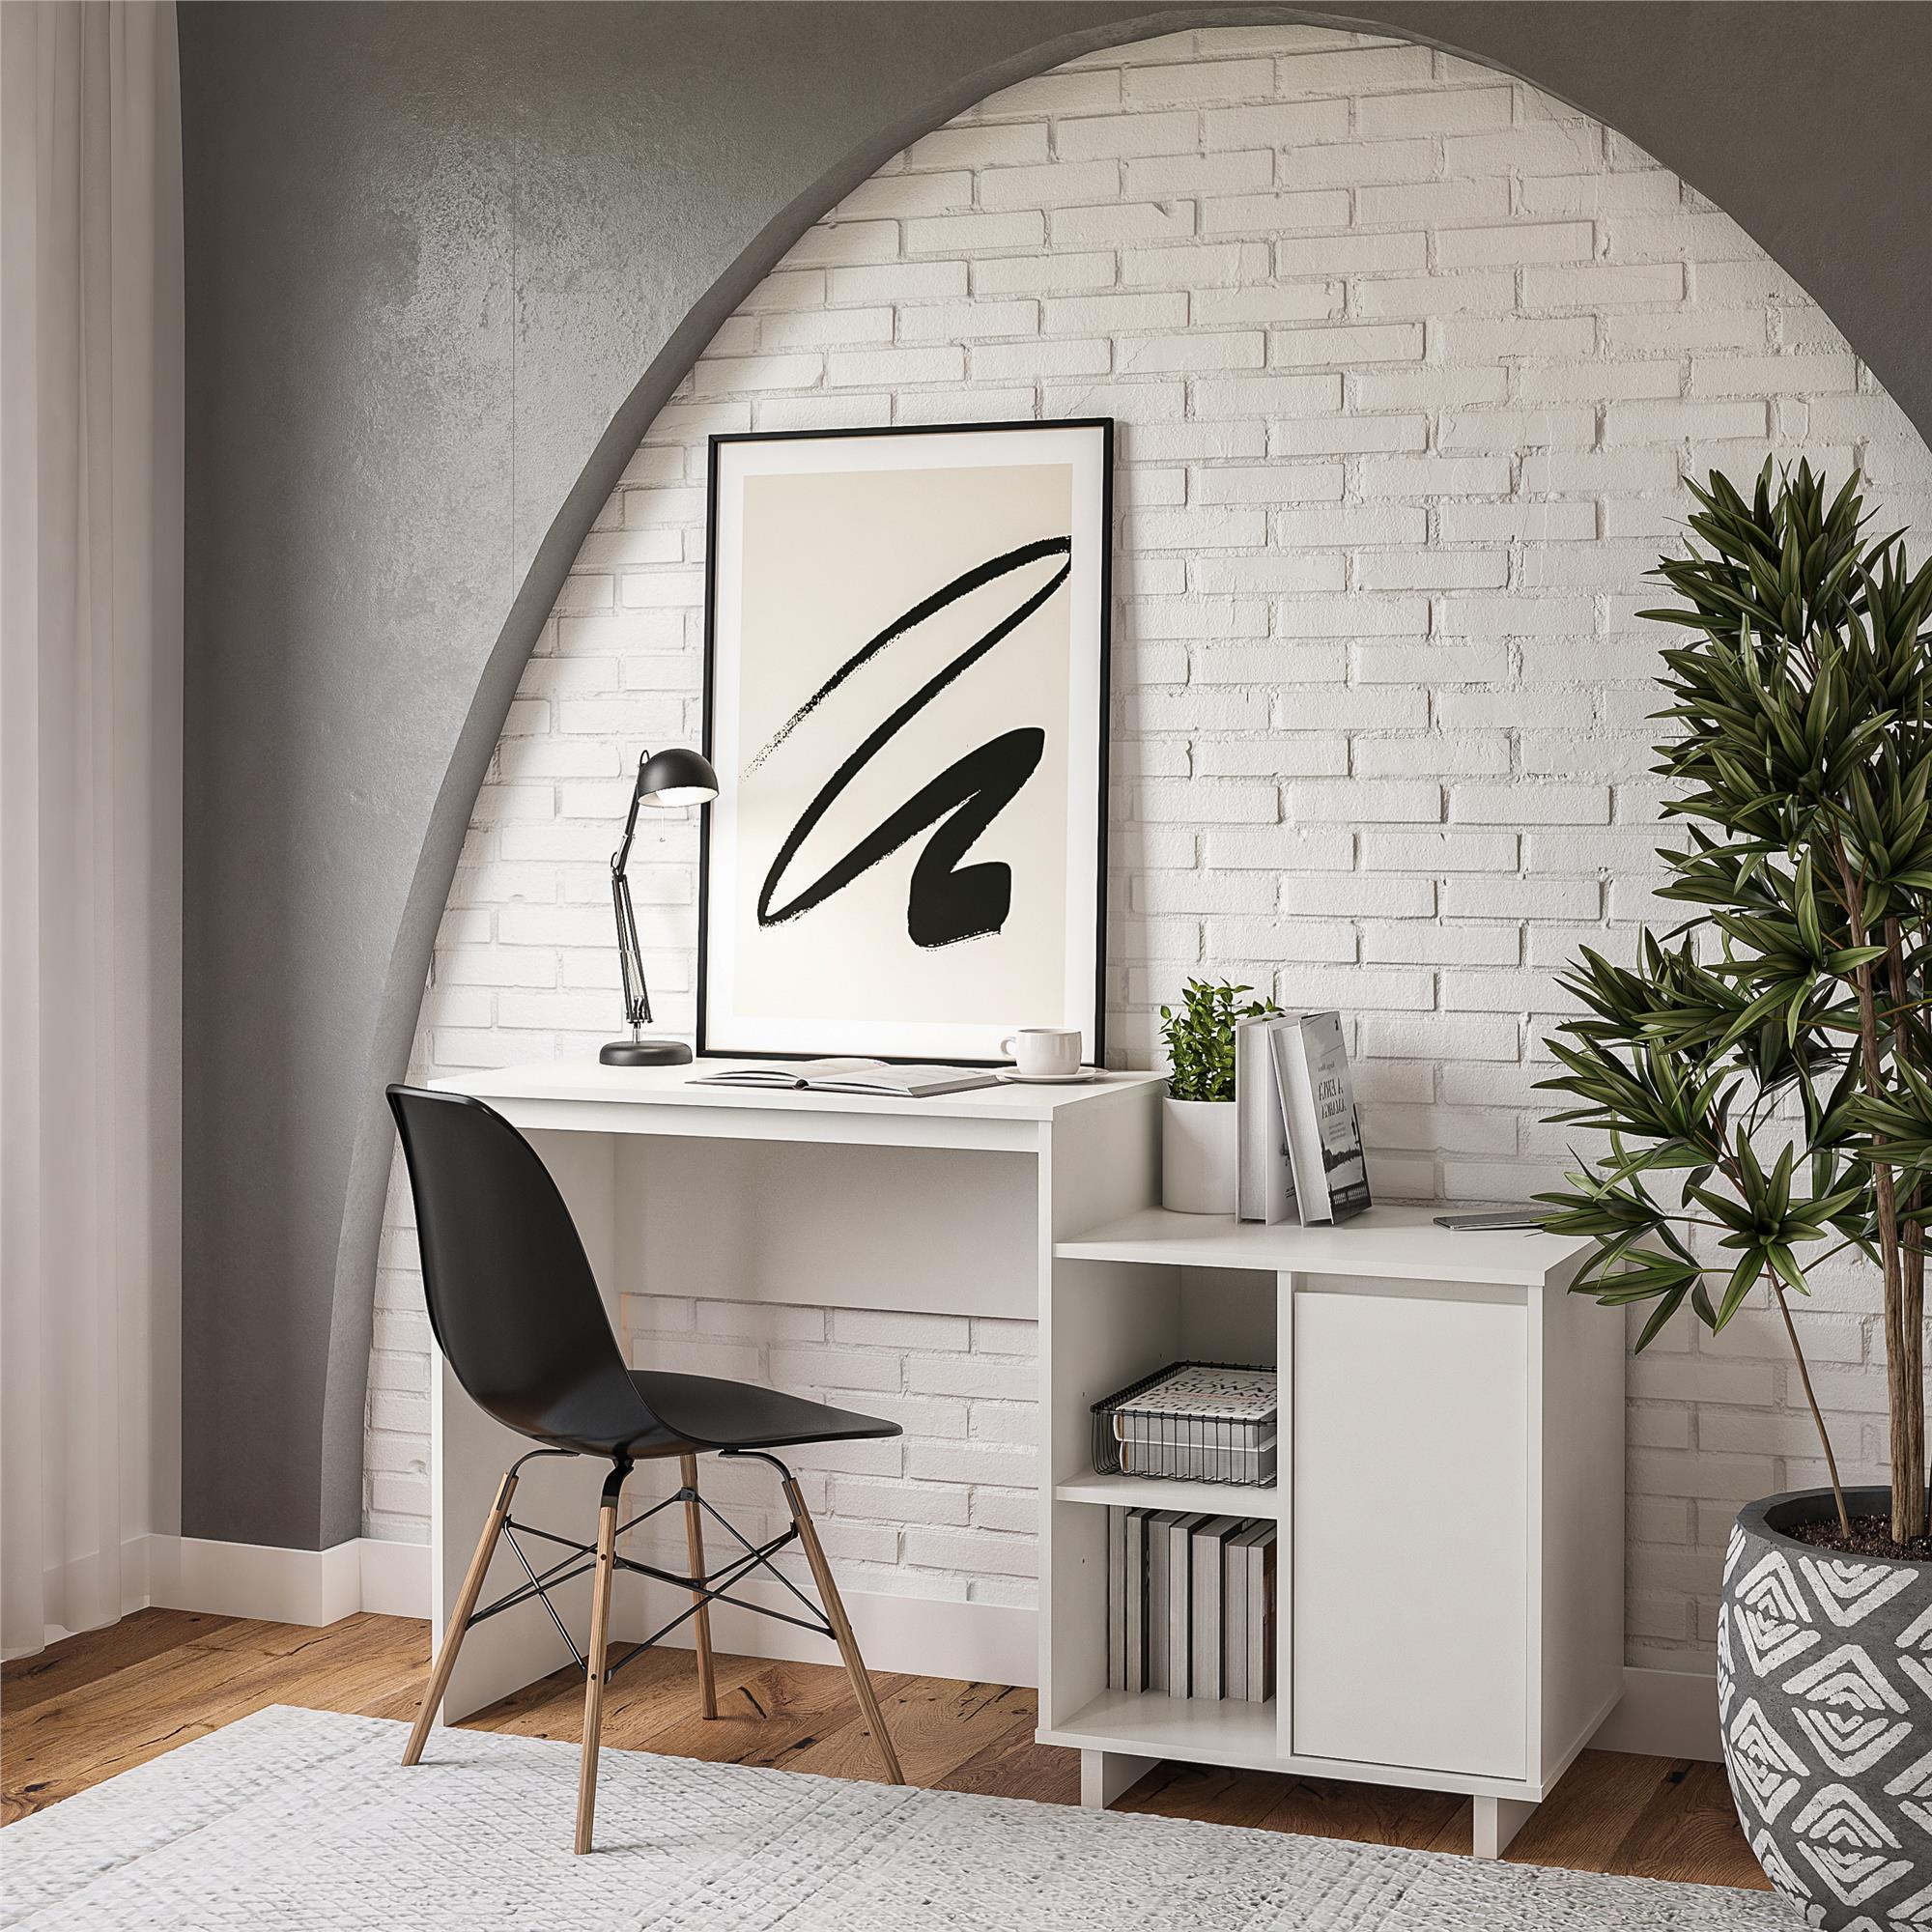 Ameriwood Home Renwick Computer Desk / Cabinet Combo with Wireless Charging Port, White - image 2 of 13